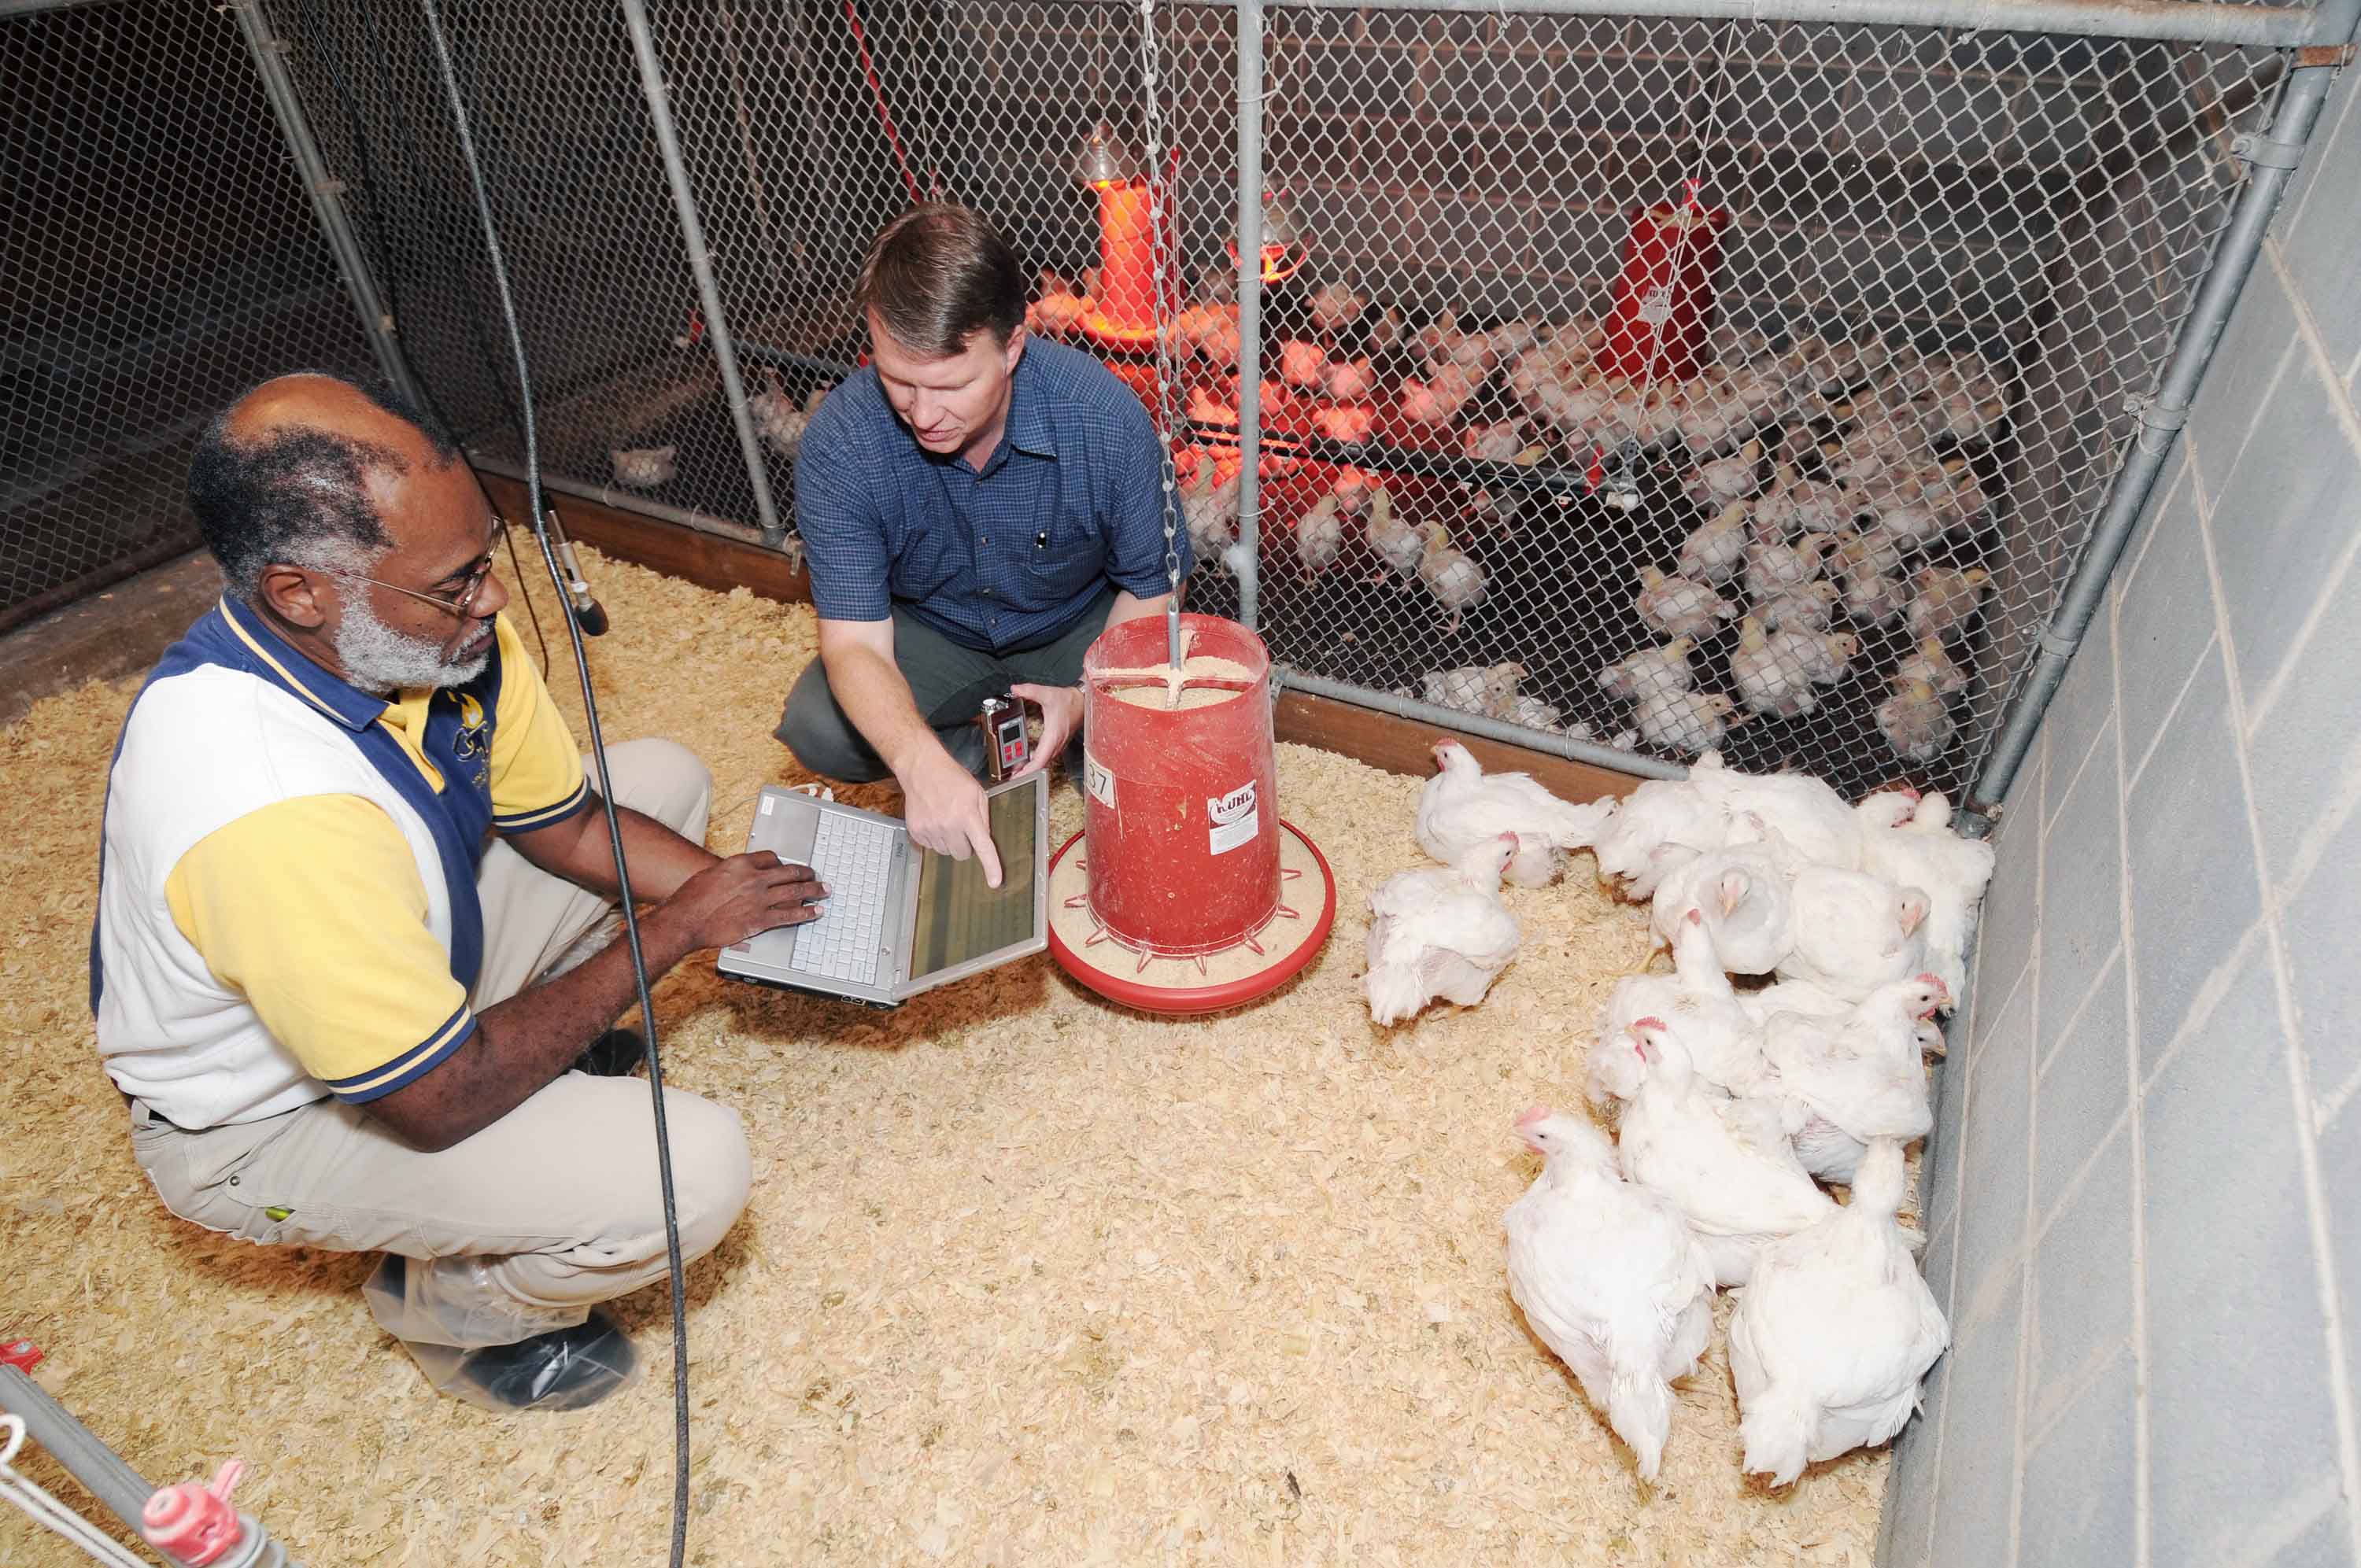 Wayne Daley, a Georgia Tech Research Institute (GTRI) principal research scientist, and Casey Ritz, a University of Georgia associate professor of poultry science, prepare to record vocalizations of a small flock of chickens at the University of Georgia's Poultry Research Center. (Credit: Gary Meek)